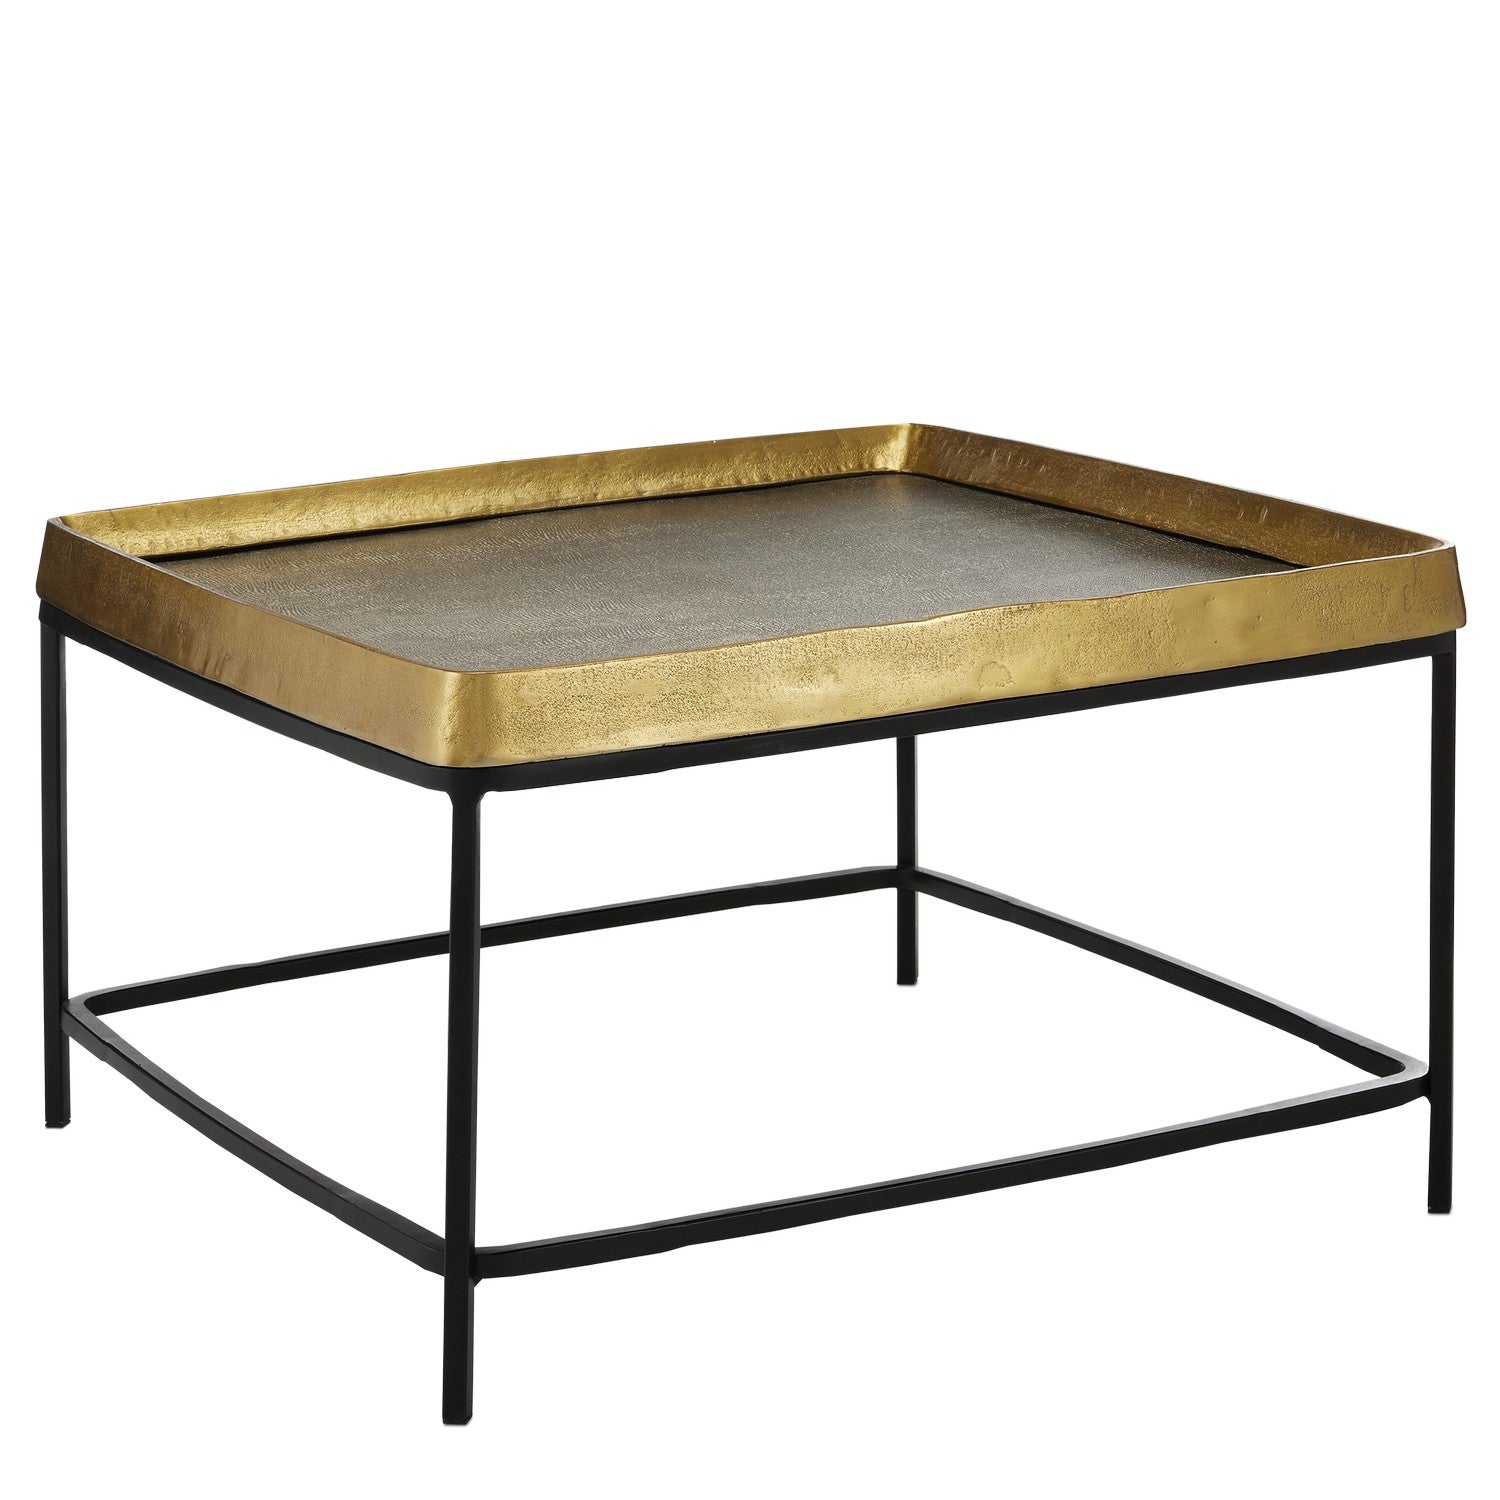 Currey and Company - 4000-0151 - Cocktail Table - Antique Brass/Graphite/Black